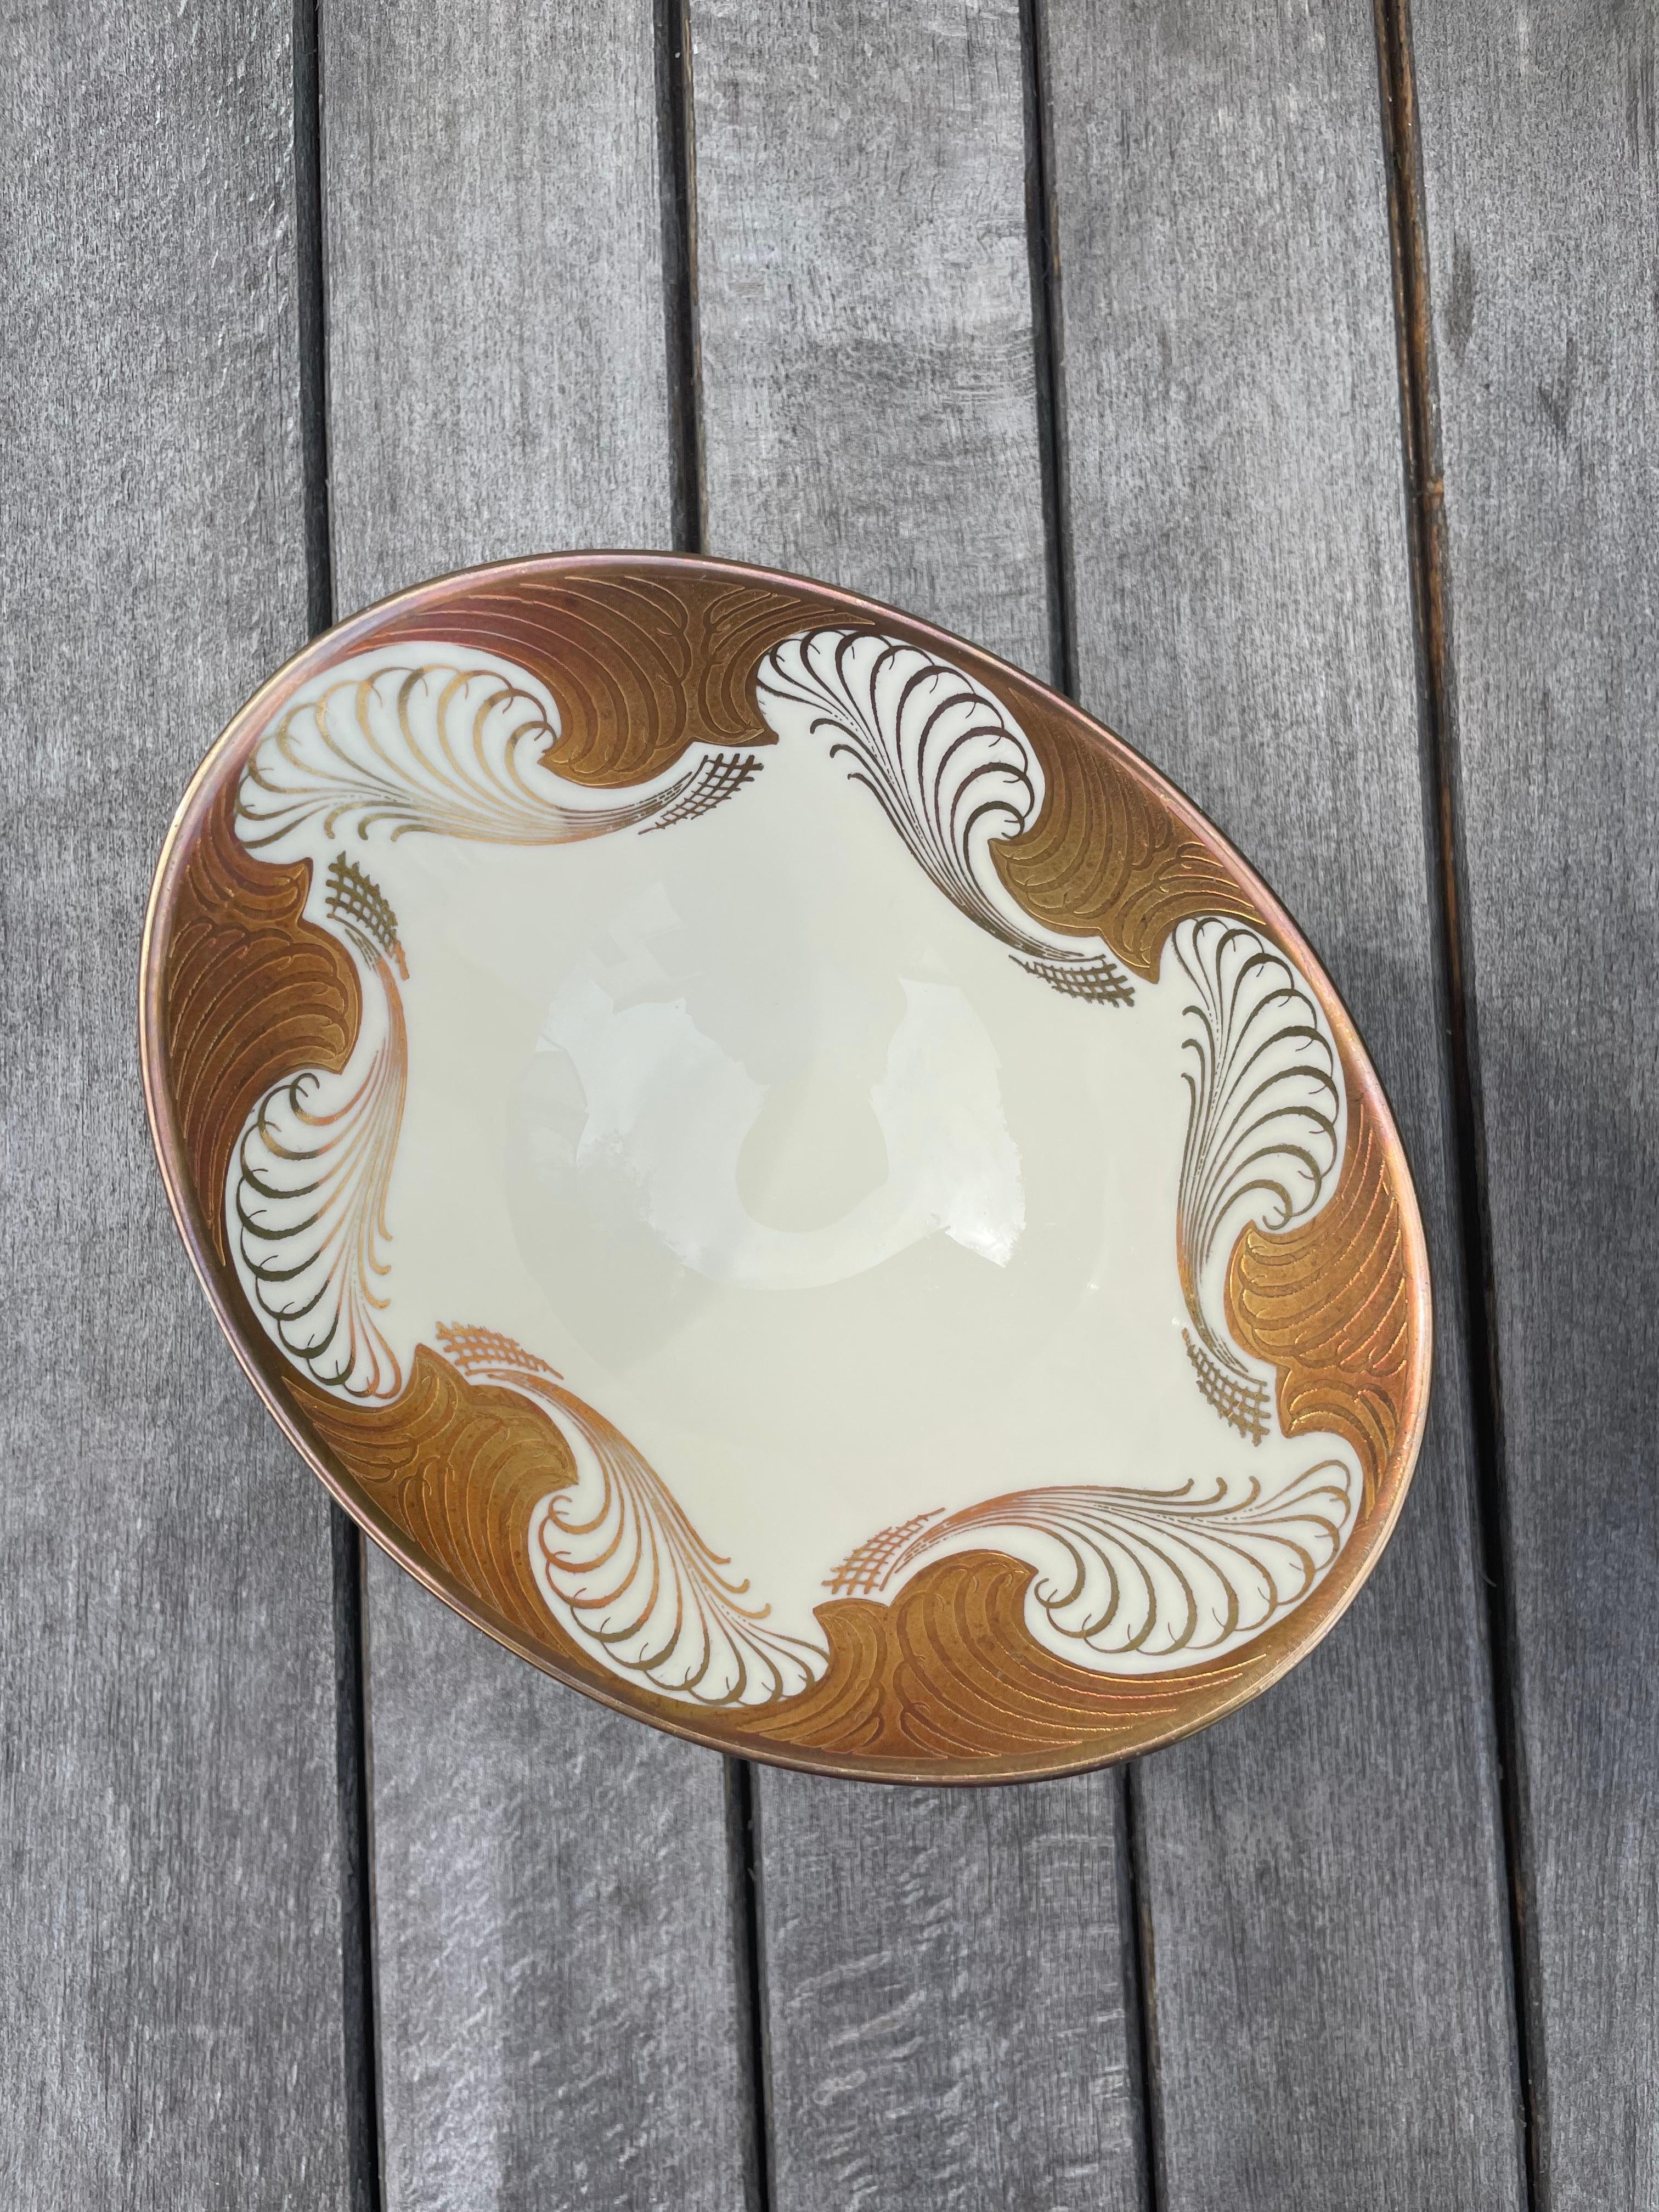 Cream white porcelain bowl with bronze golden art nouveau lines and shell shaped decorations. Oval form on round foot. Manufactured by Alka Kunst Bavaria in the 1960s. Stamped under base. Beautiful vintage condition.
Germany, 1960s.